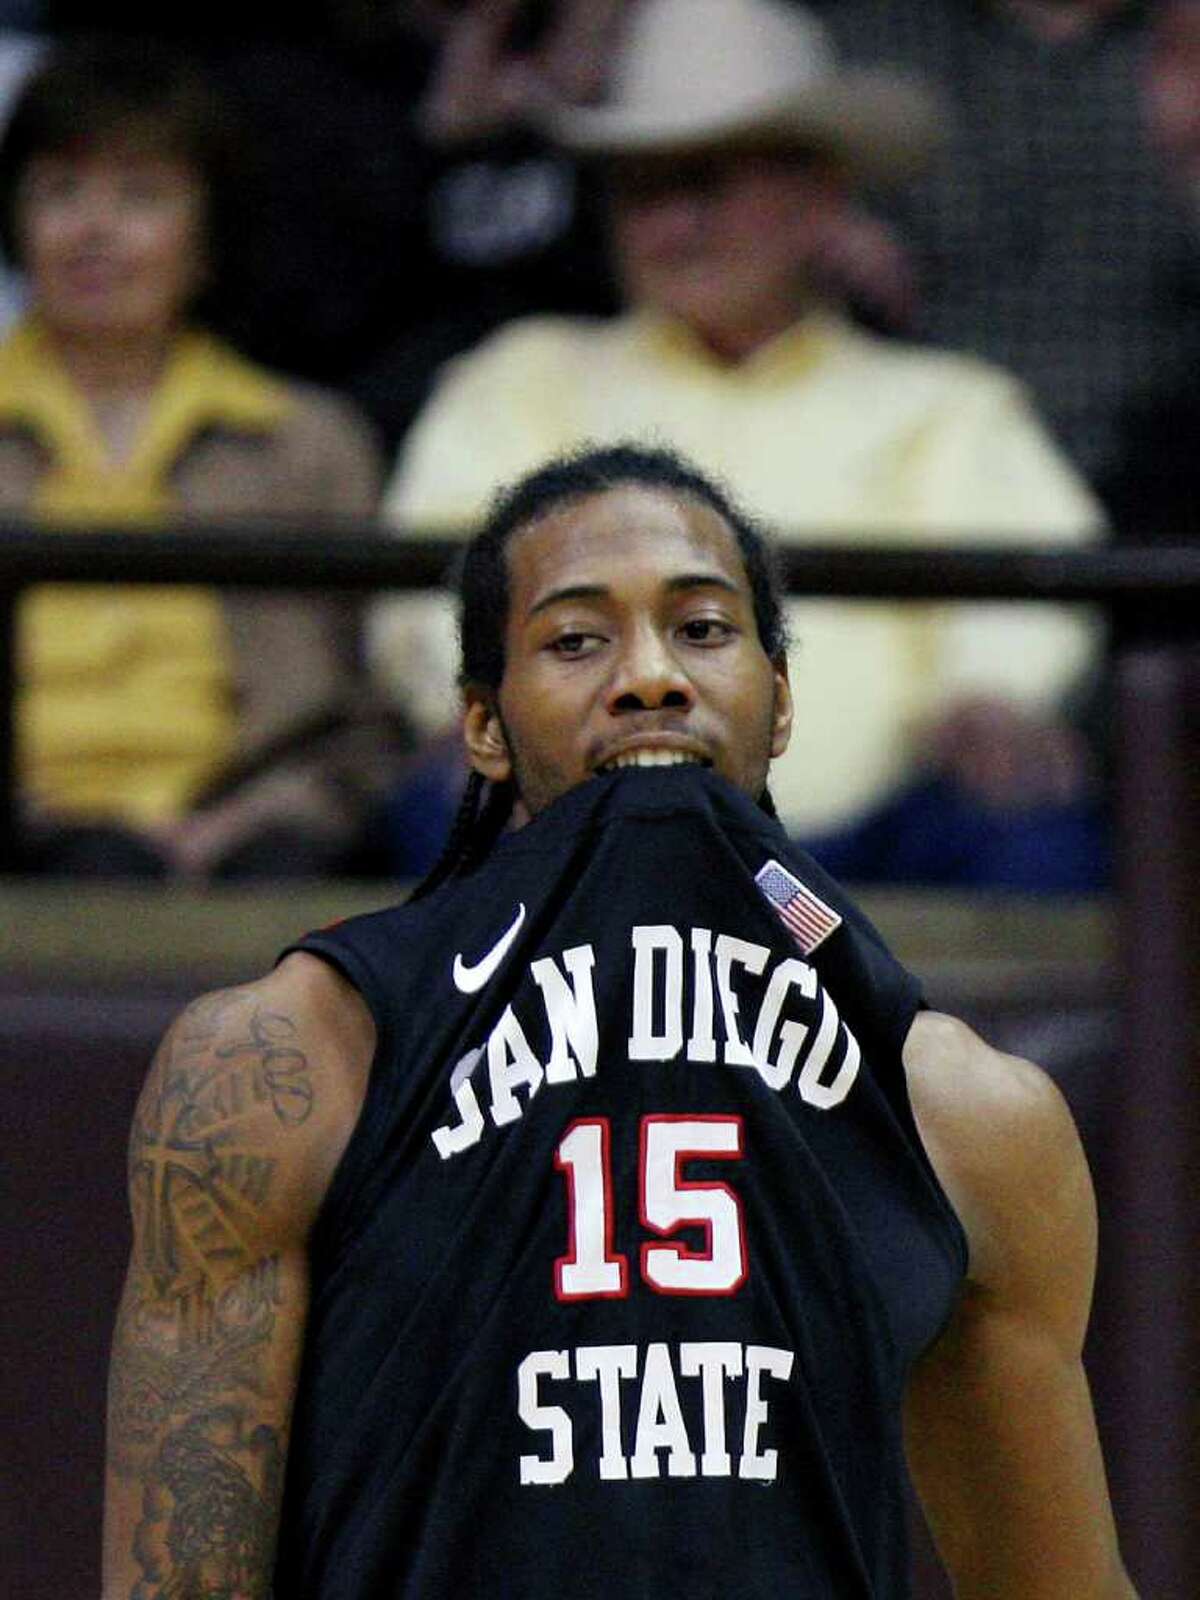 San Diego State forward Kawhi Leonard bites his jersey during an NCAA college basketball game against Wyoming on Tuesday, March 1, 2011, in Laramie, Wyo.